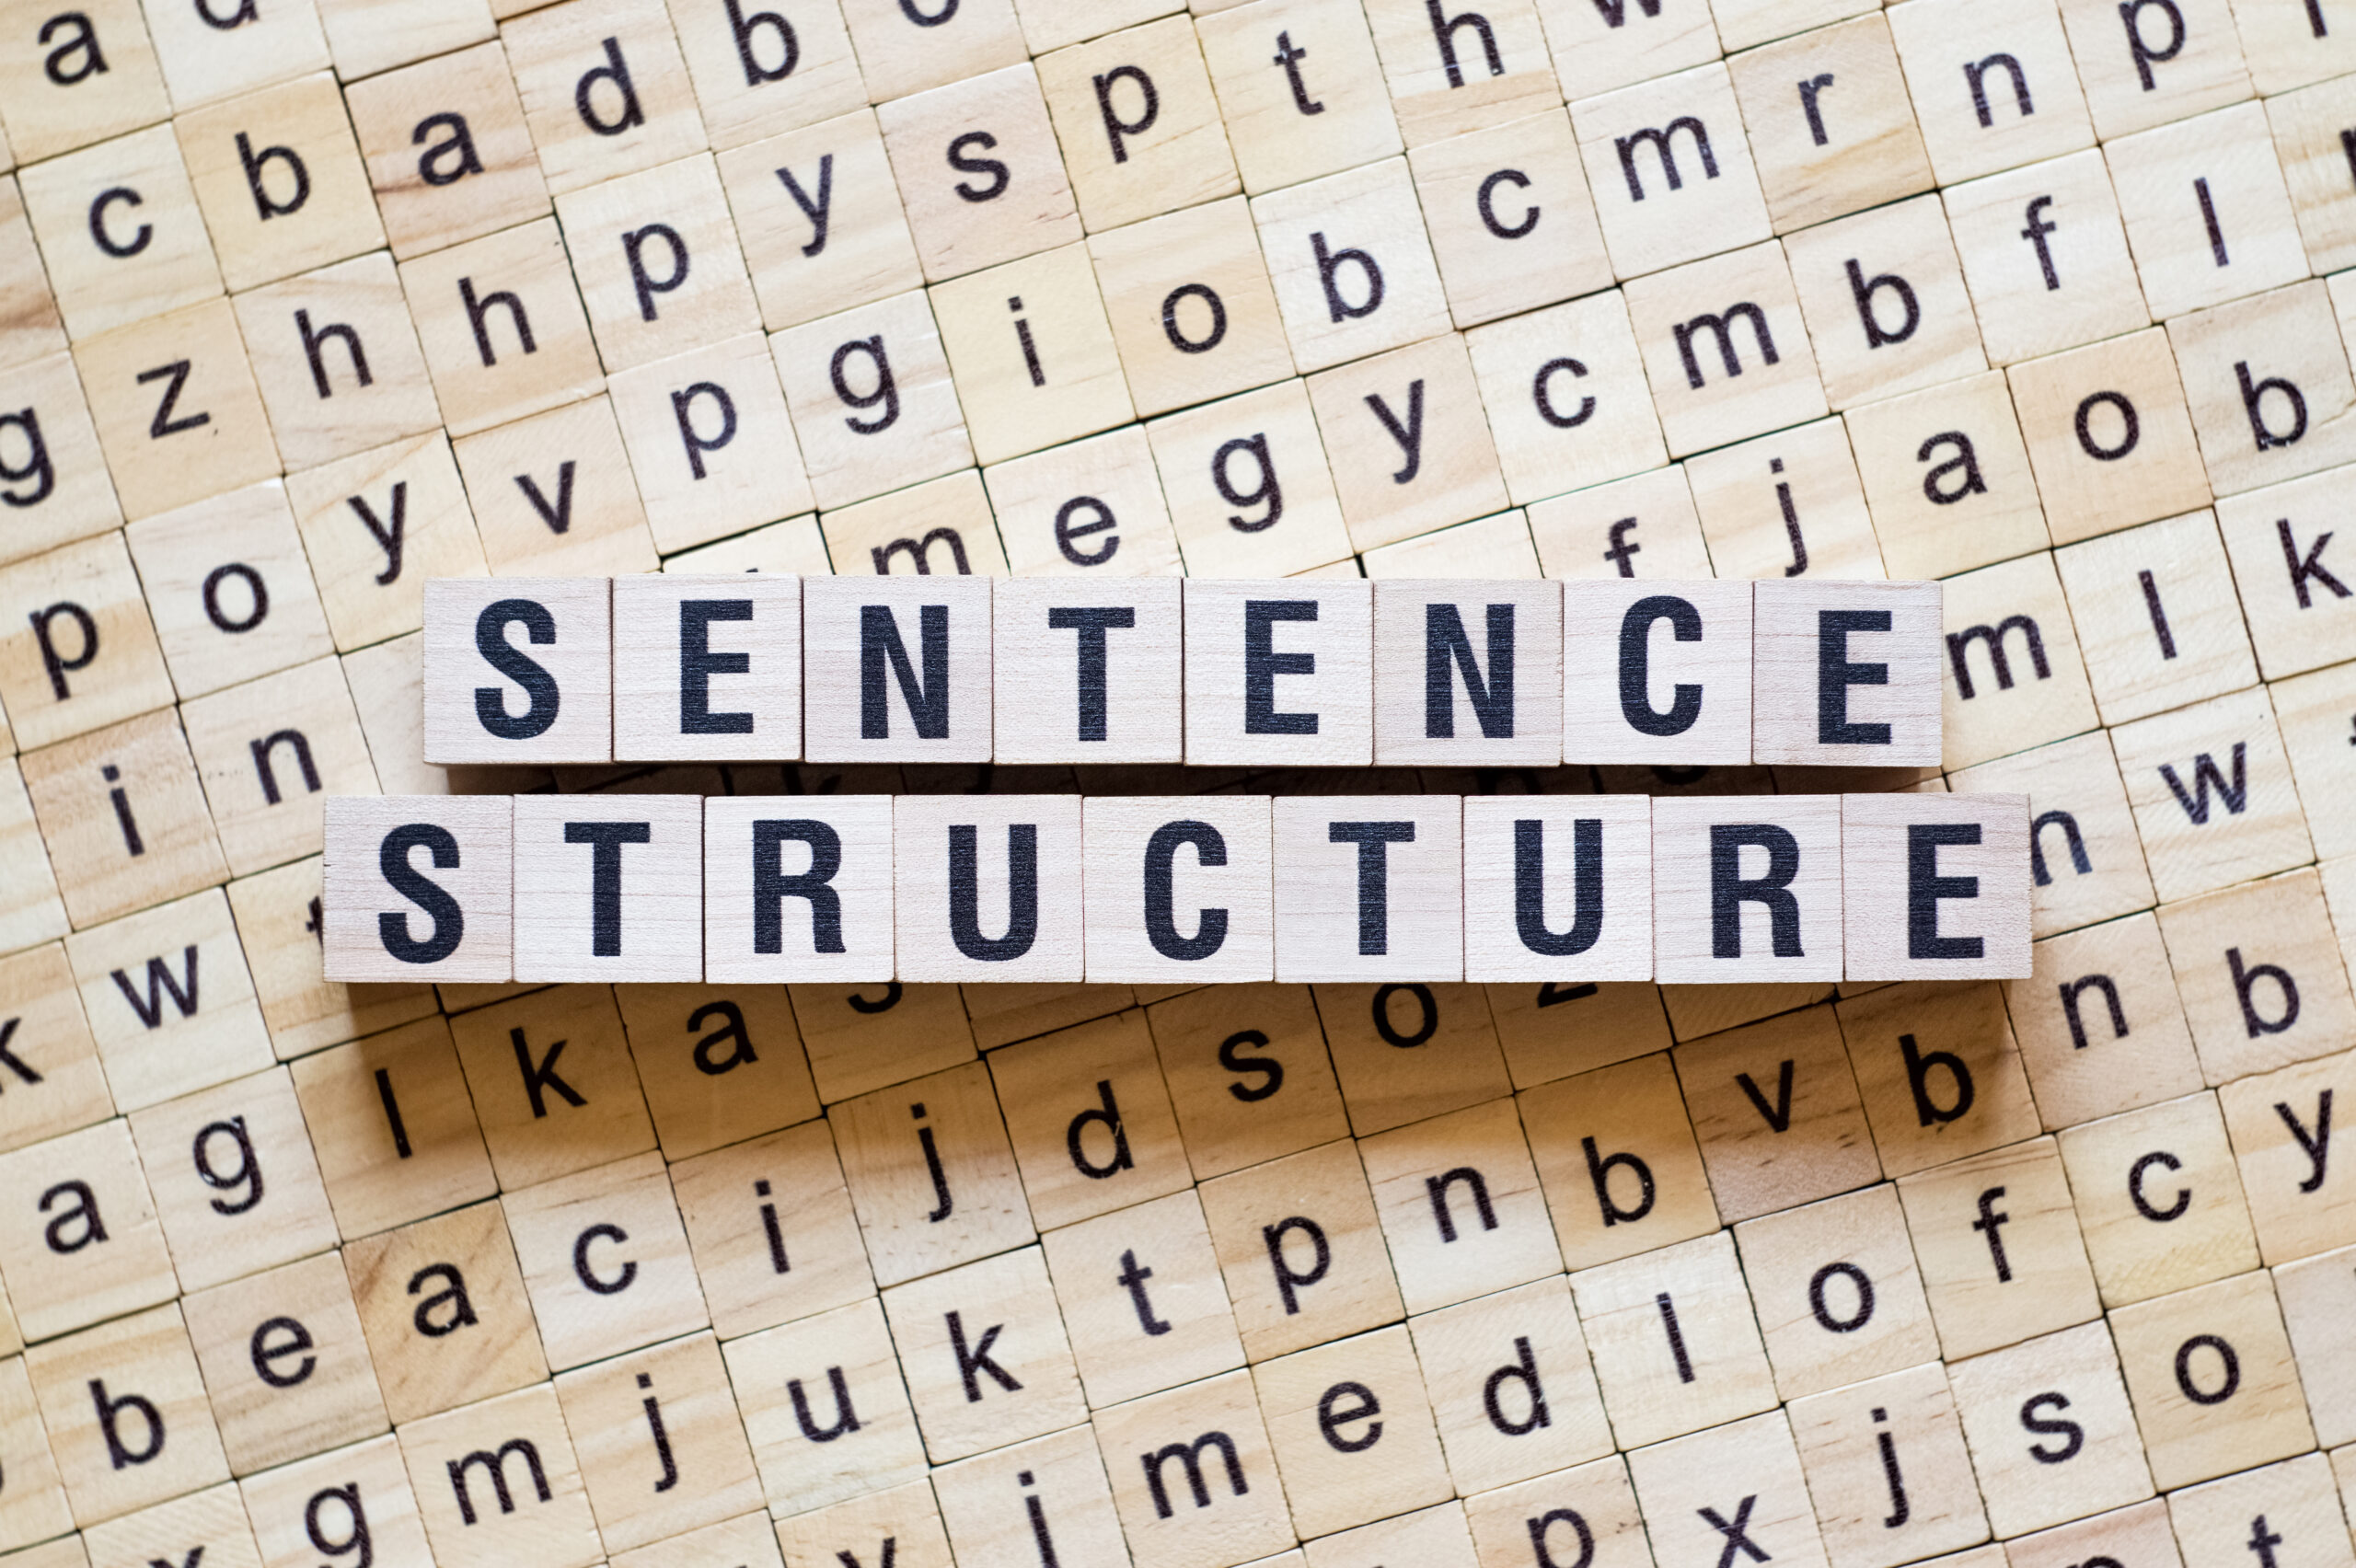 Well, you’ve spent a lot of time learning all these new vocabulary words but you still can’t make a sentence, huh? Let Kaleela show you the way in this article on how to make a basic sentence in Arabic.